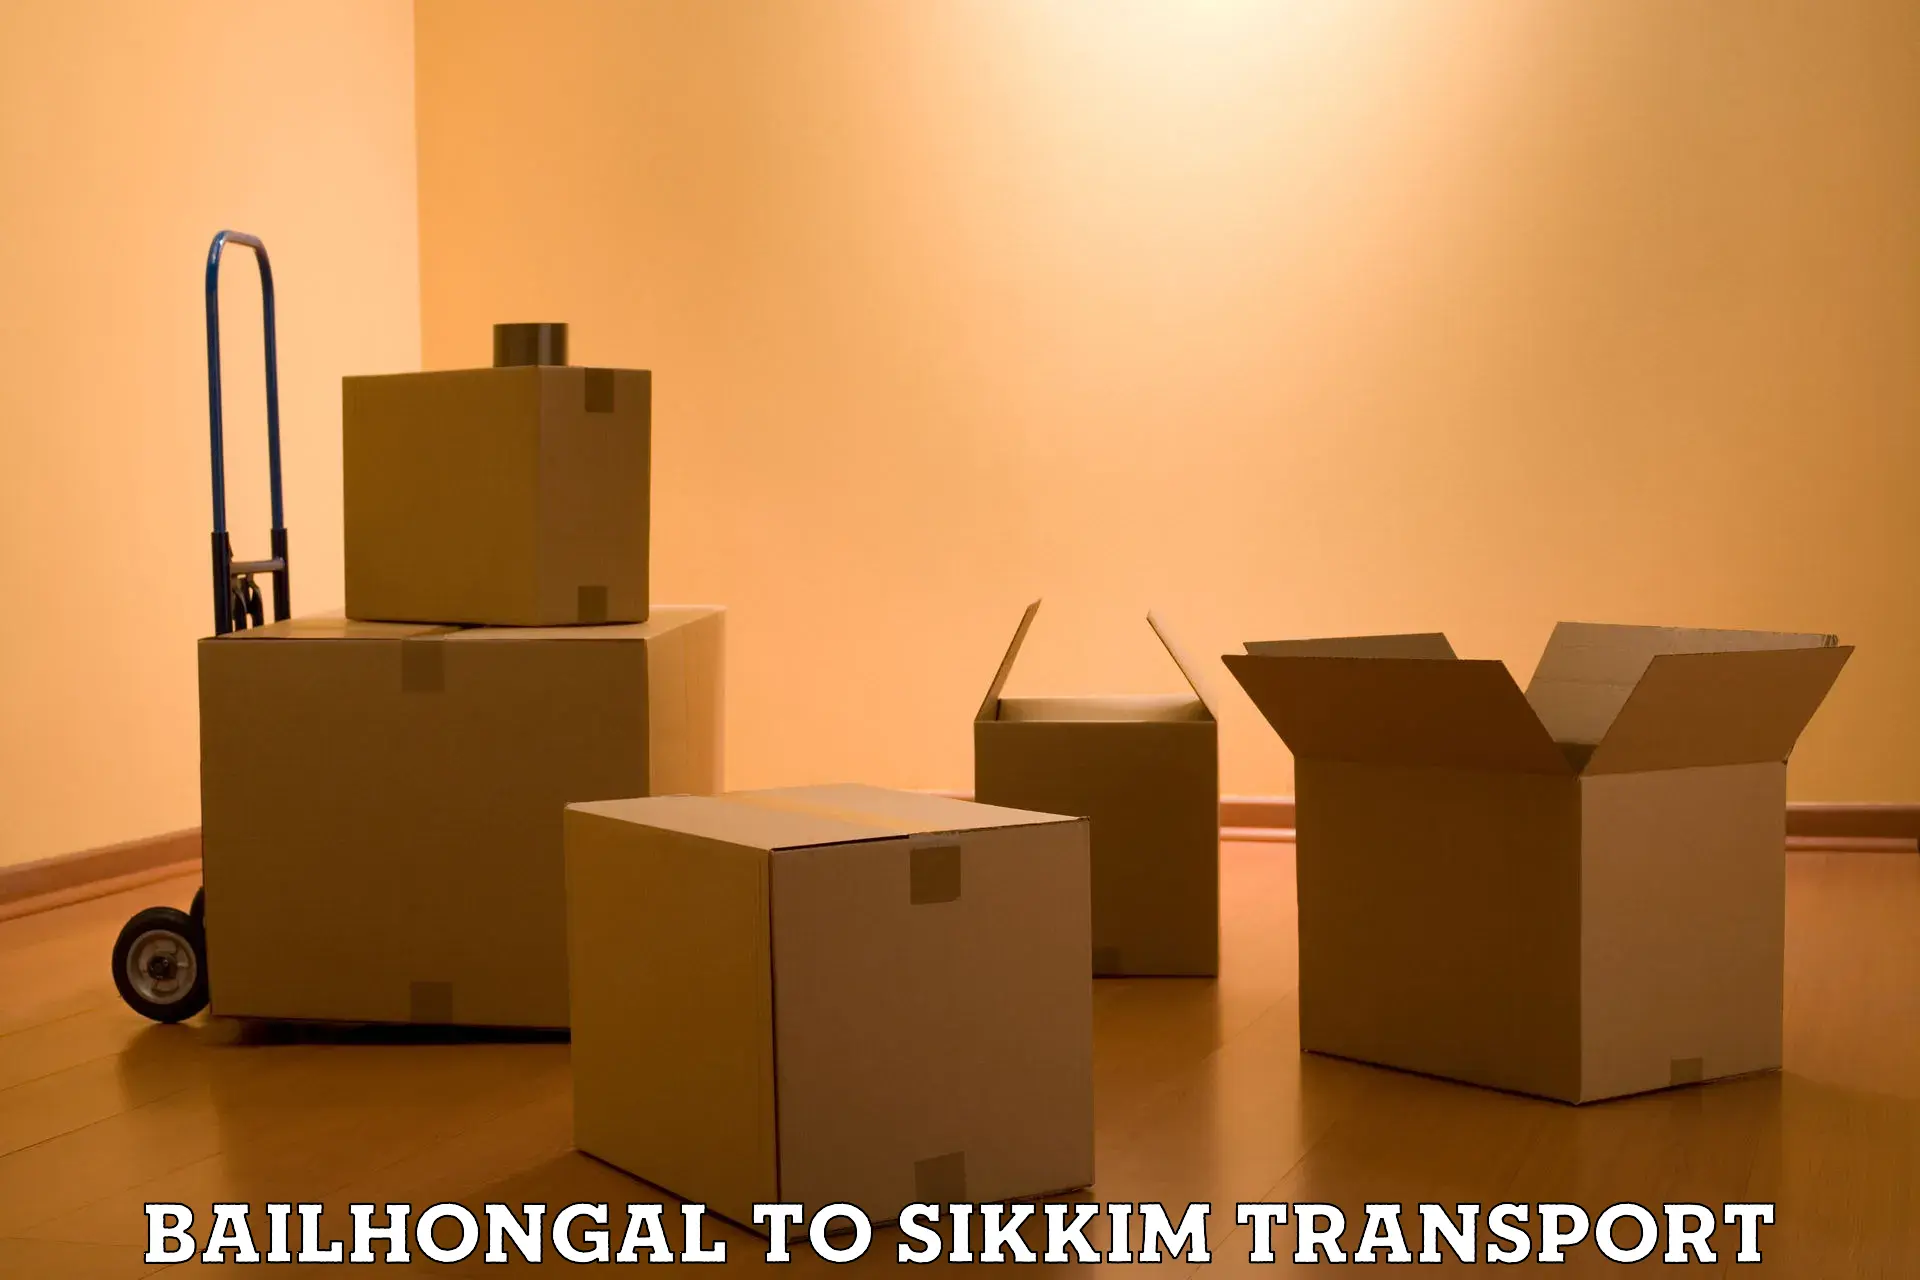 Parcel transport services Bailhongal to Pelling